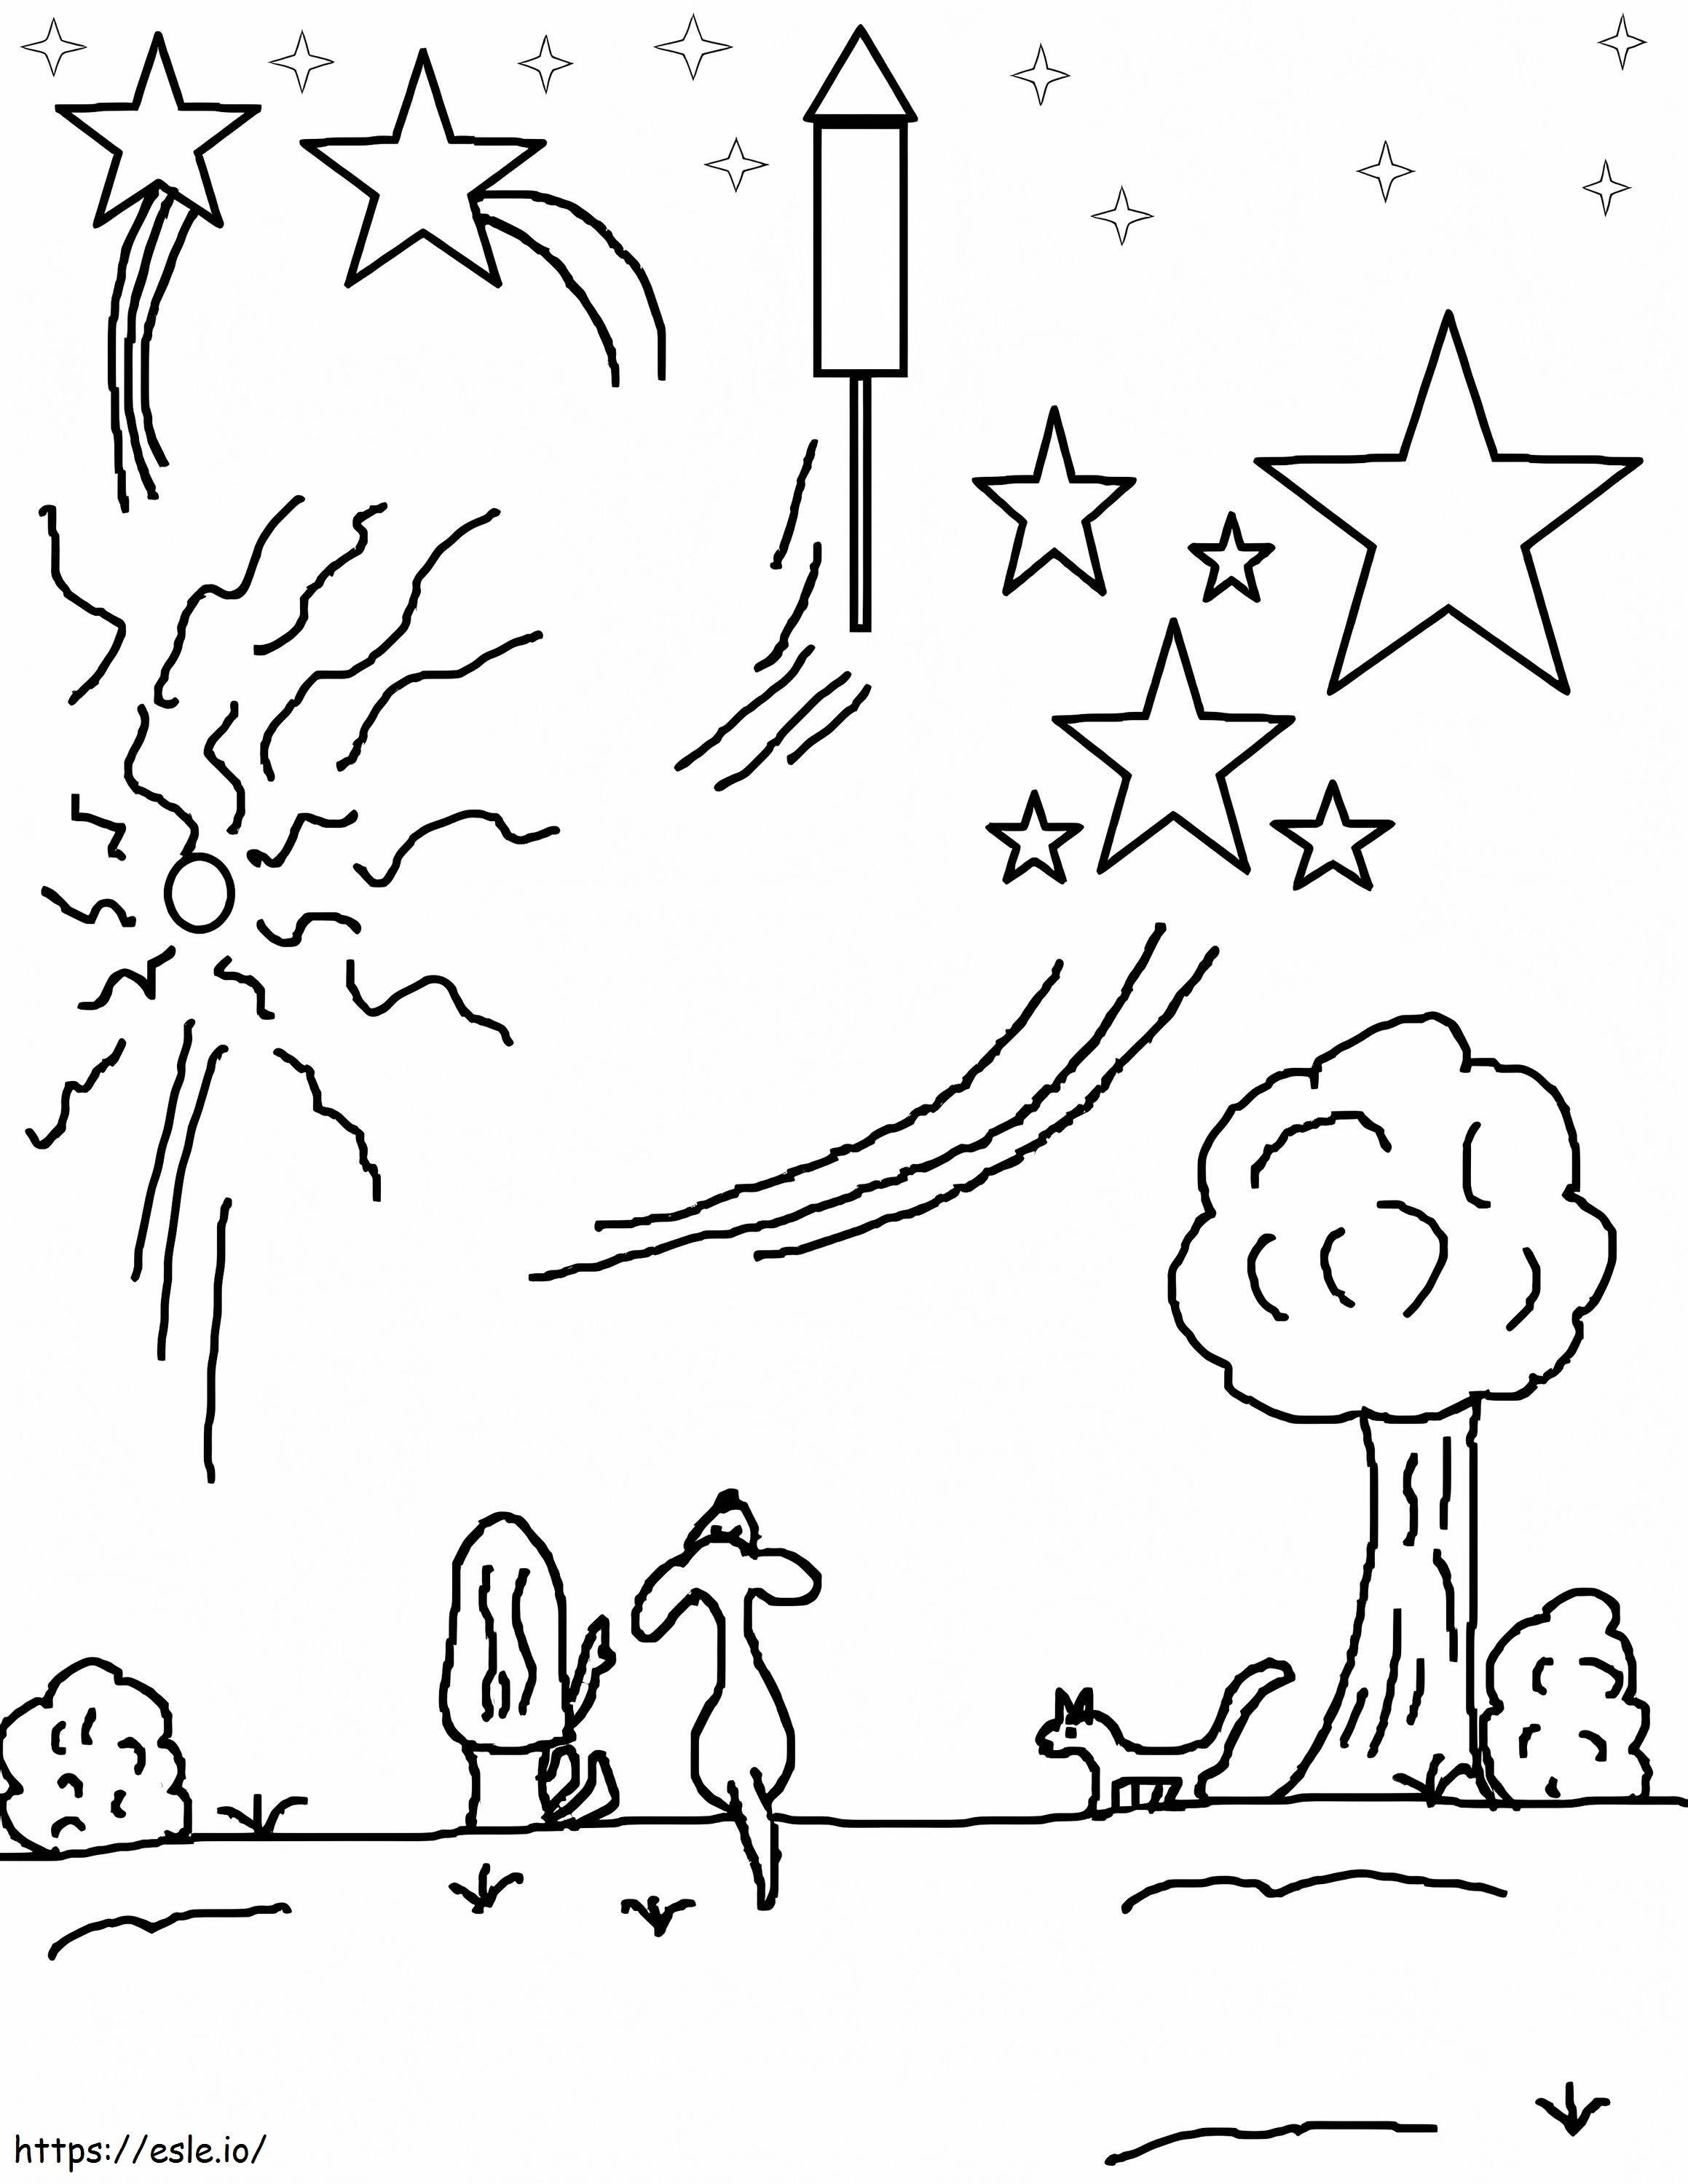 Fireworks 1 coloring page